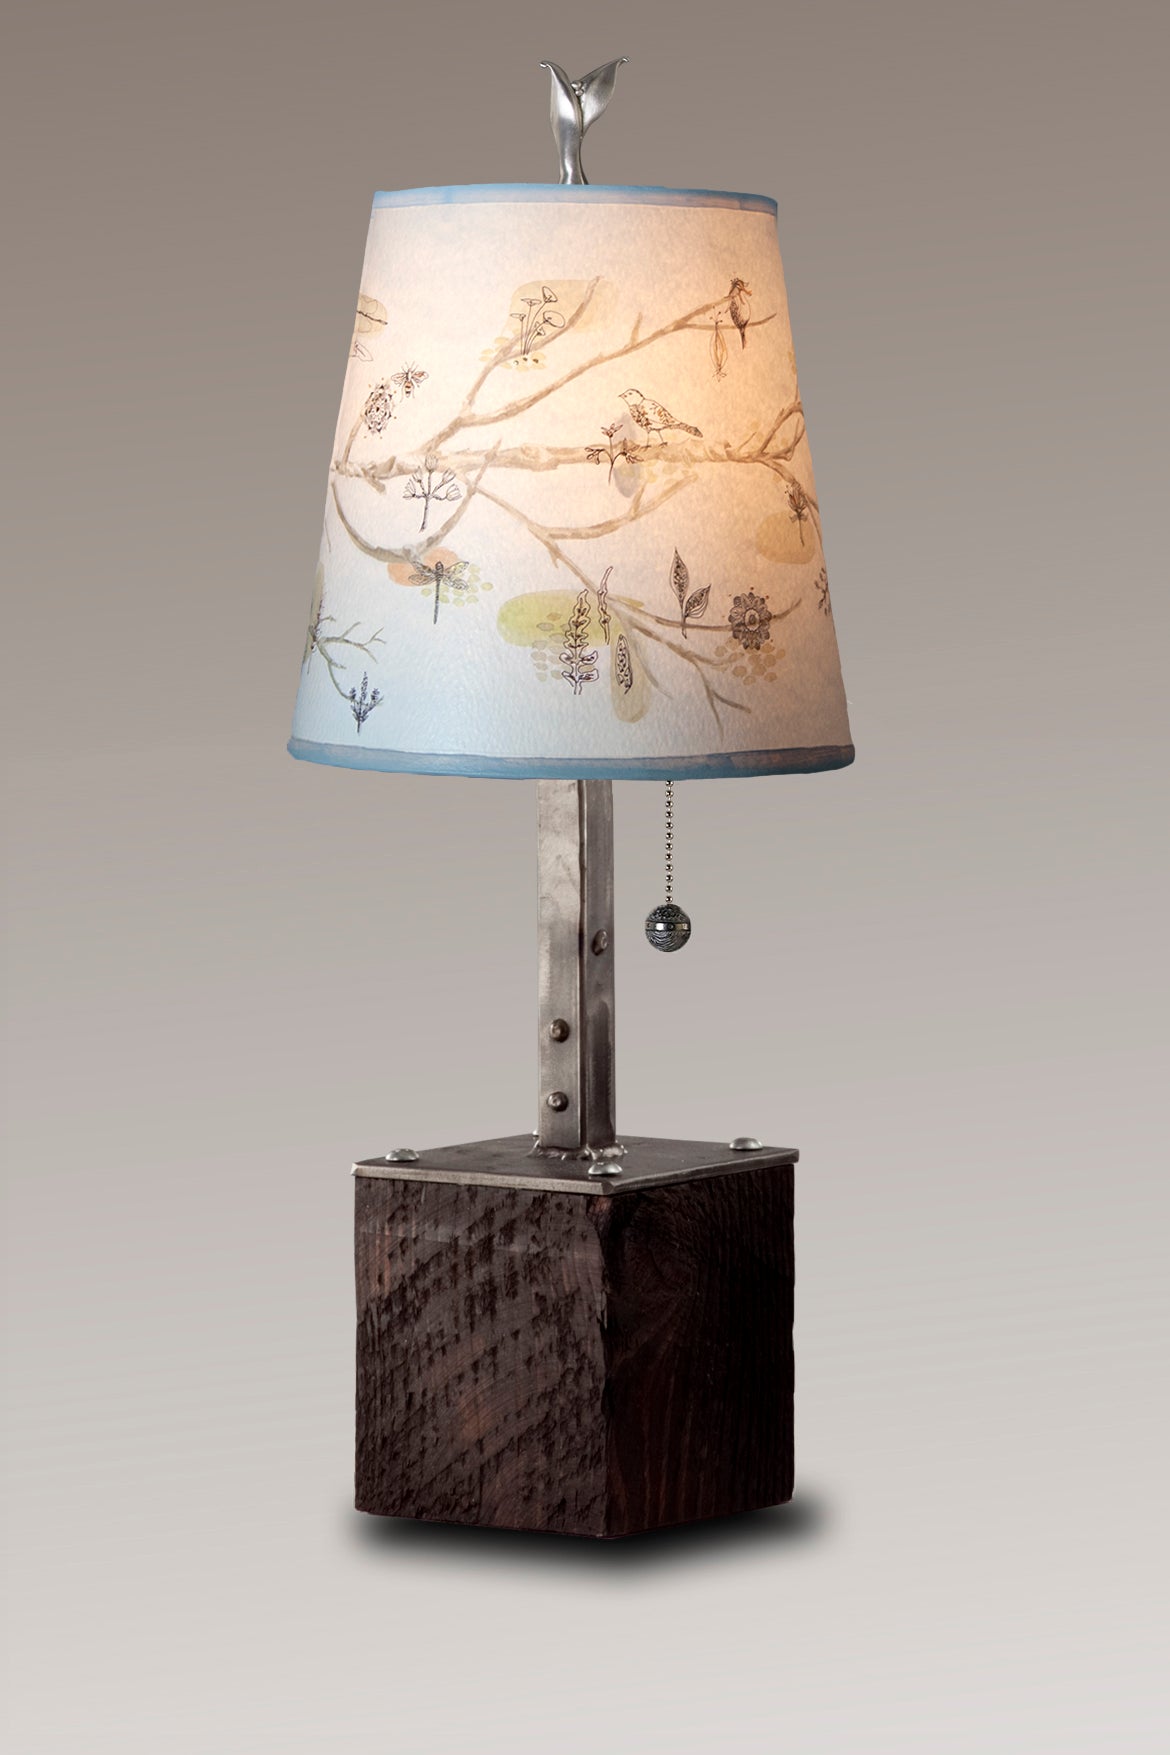 Janna Ugone &amp; Co Table Lamps Steel Table Lamp on Reclaimed Wood with Small Drum Shade in Artful Branch